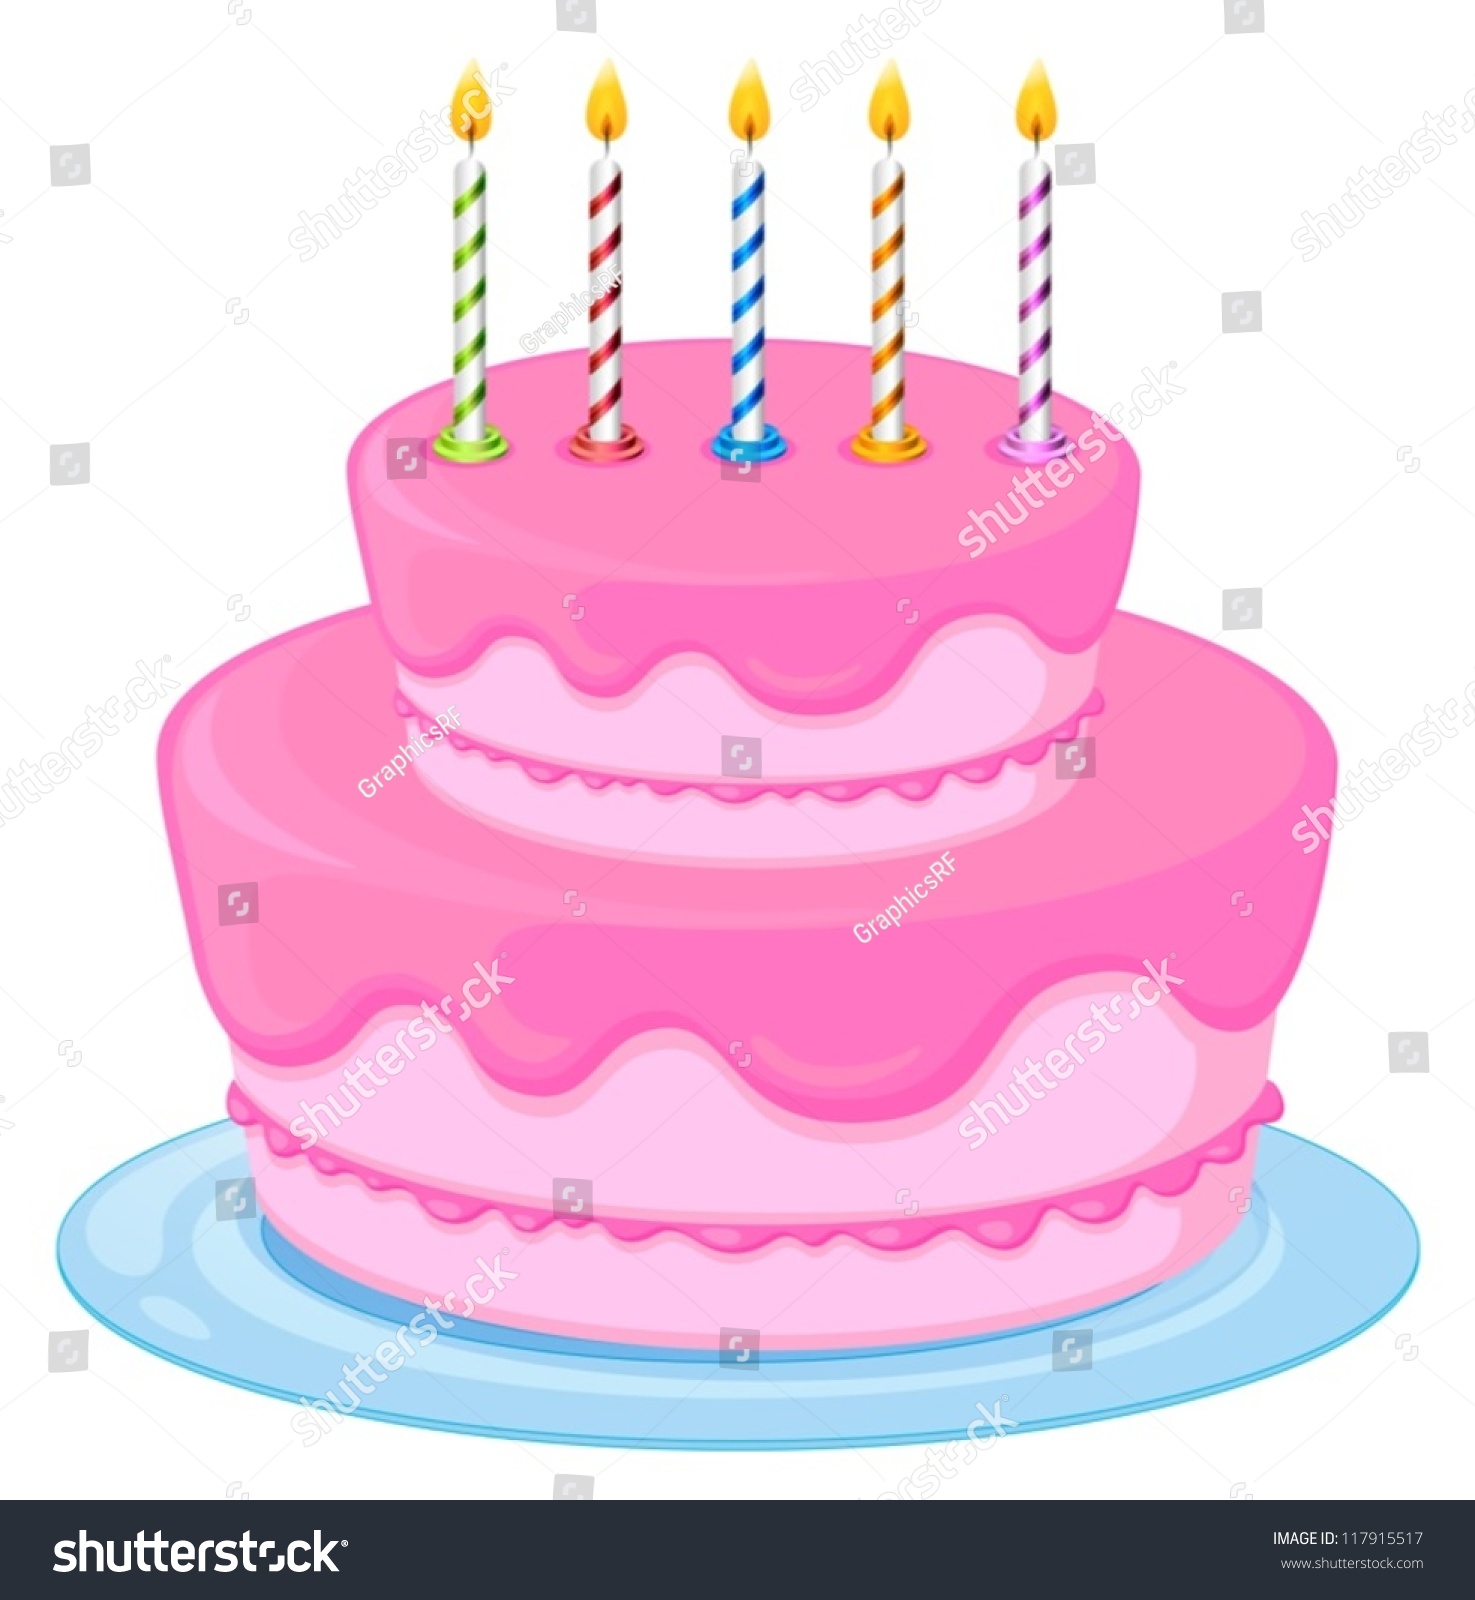 Illustration Of A Pink Birthday Cake On A White Background - 117915517 ...